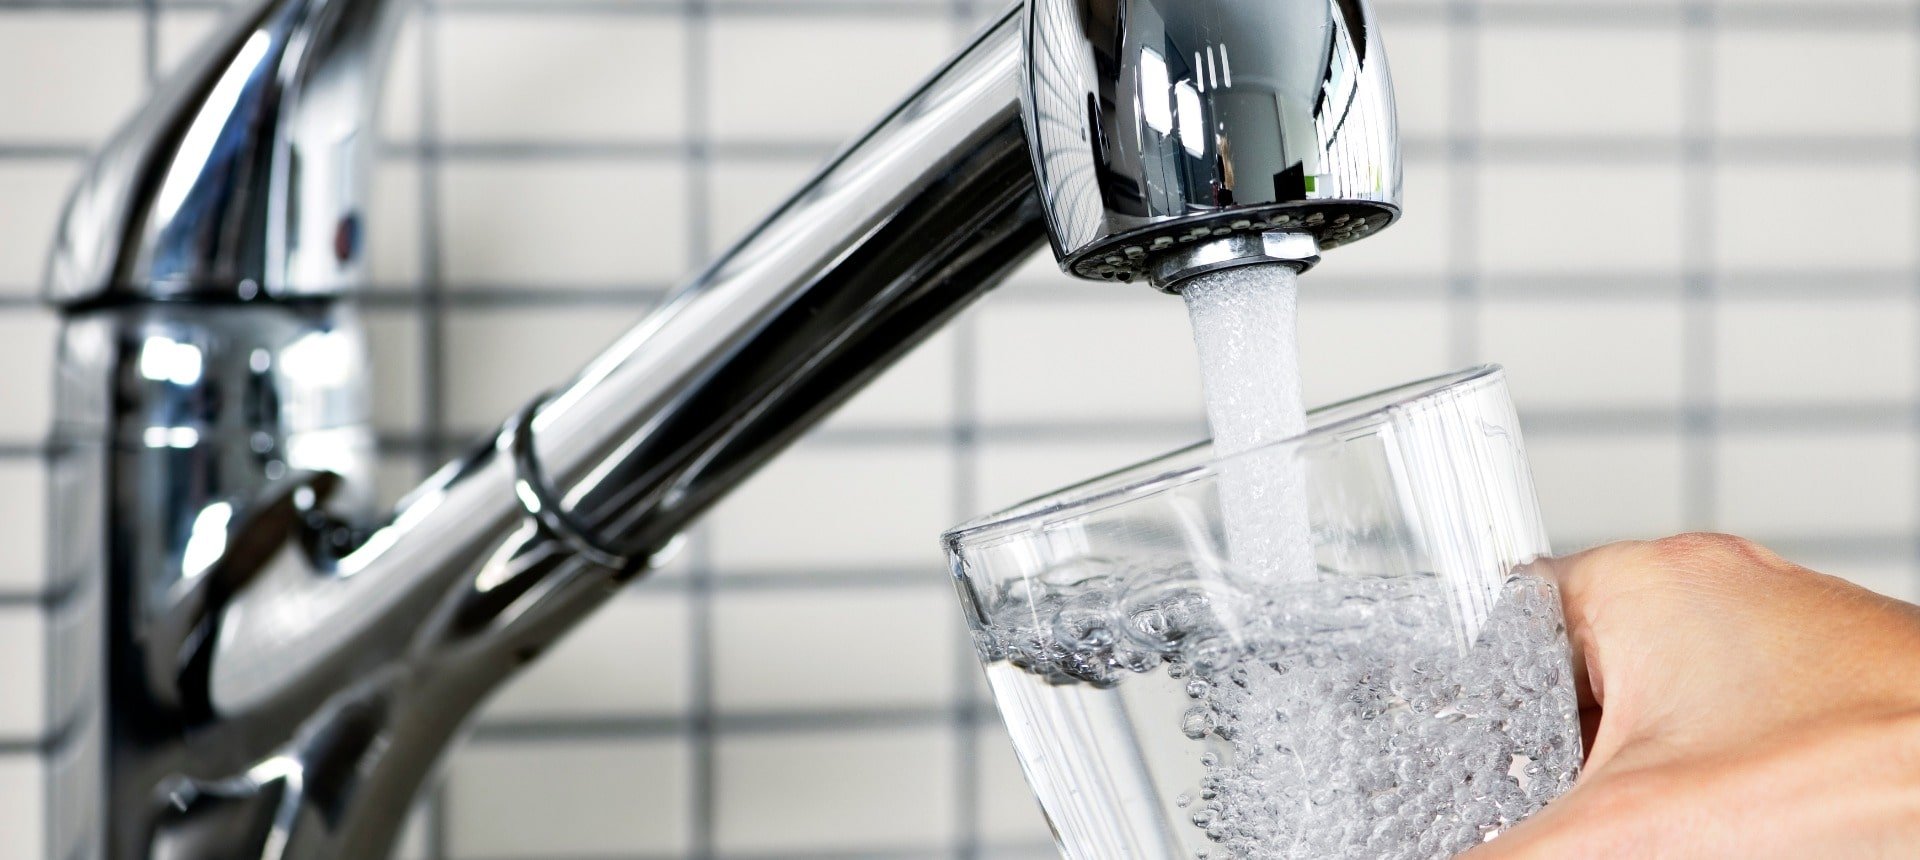 Choosing the Best Water Filtration System